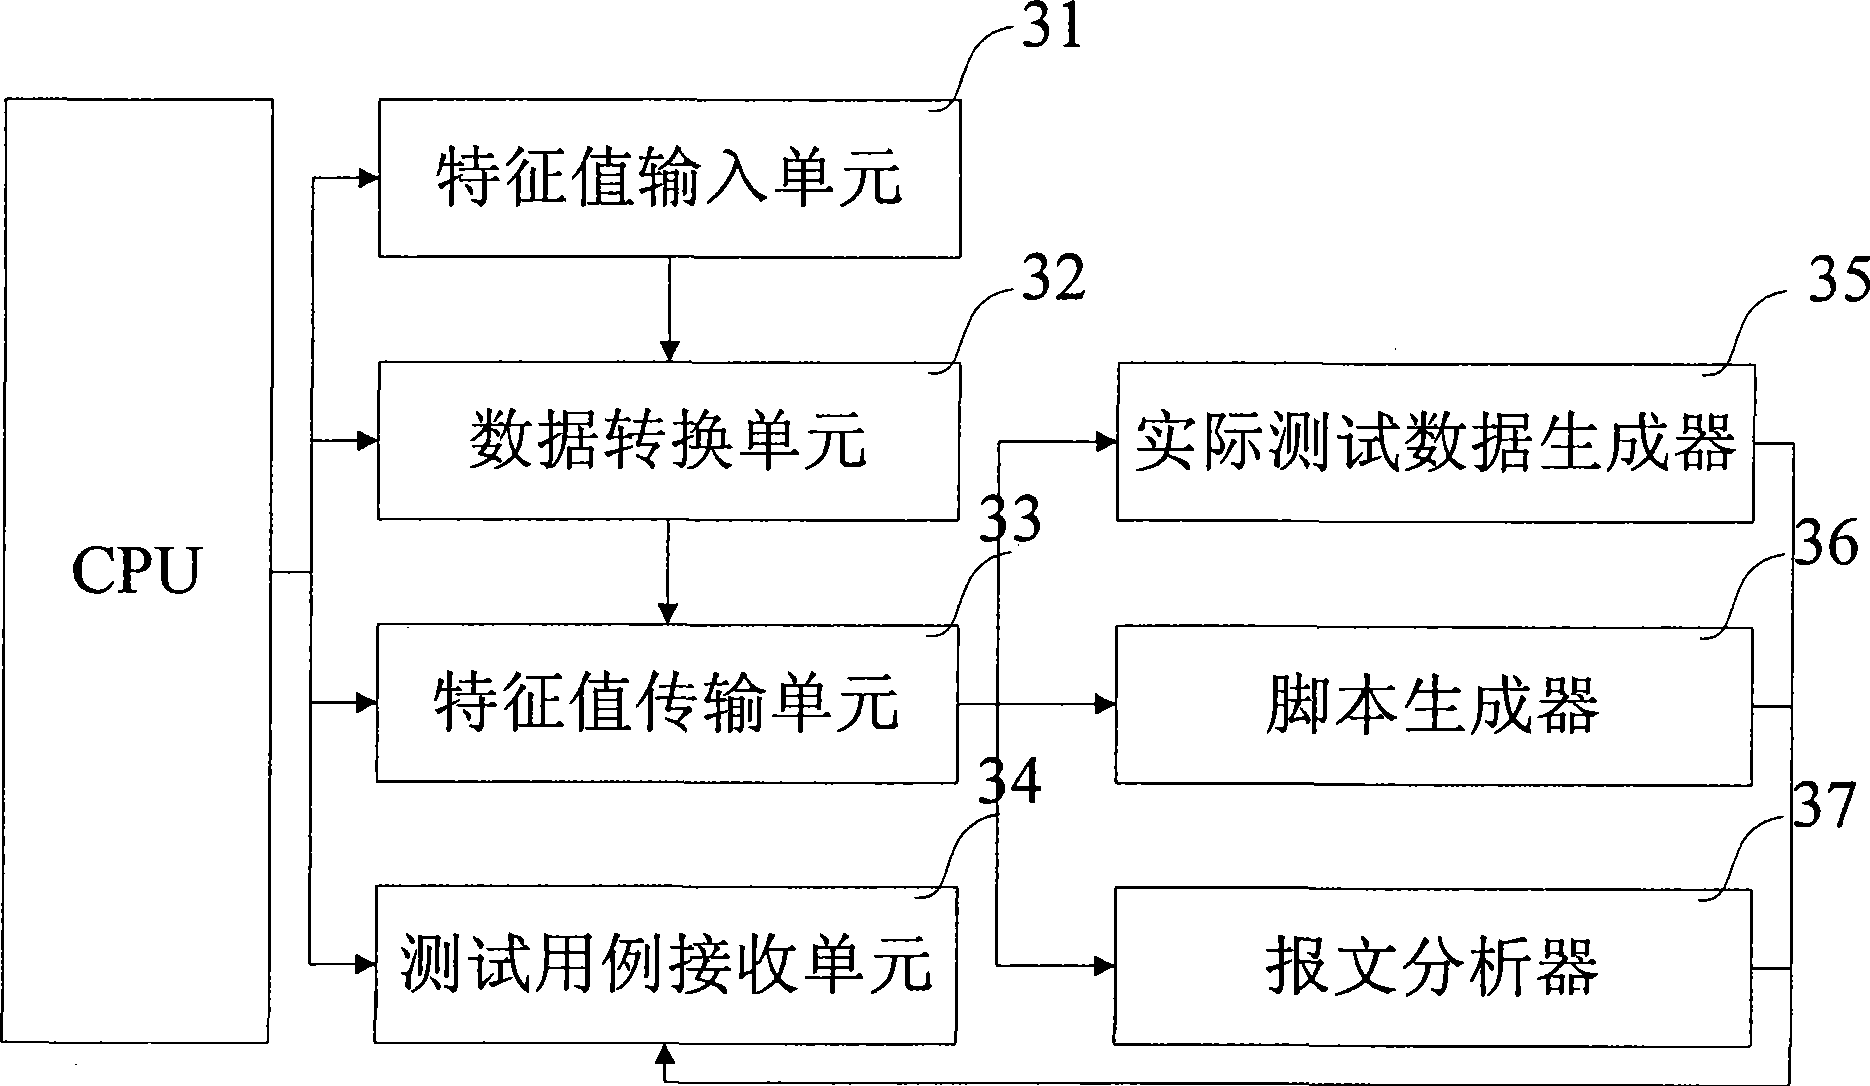 Method and system for generating test case